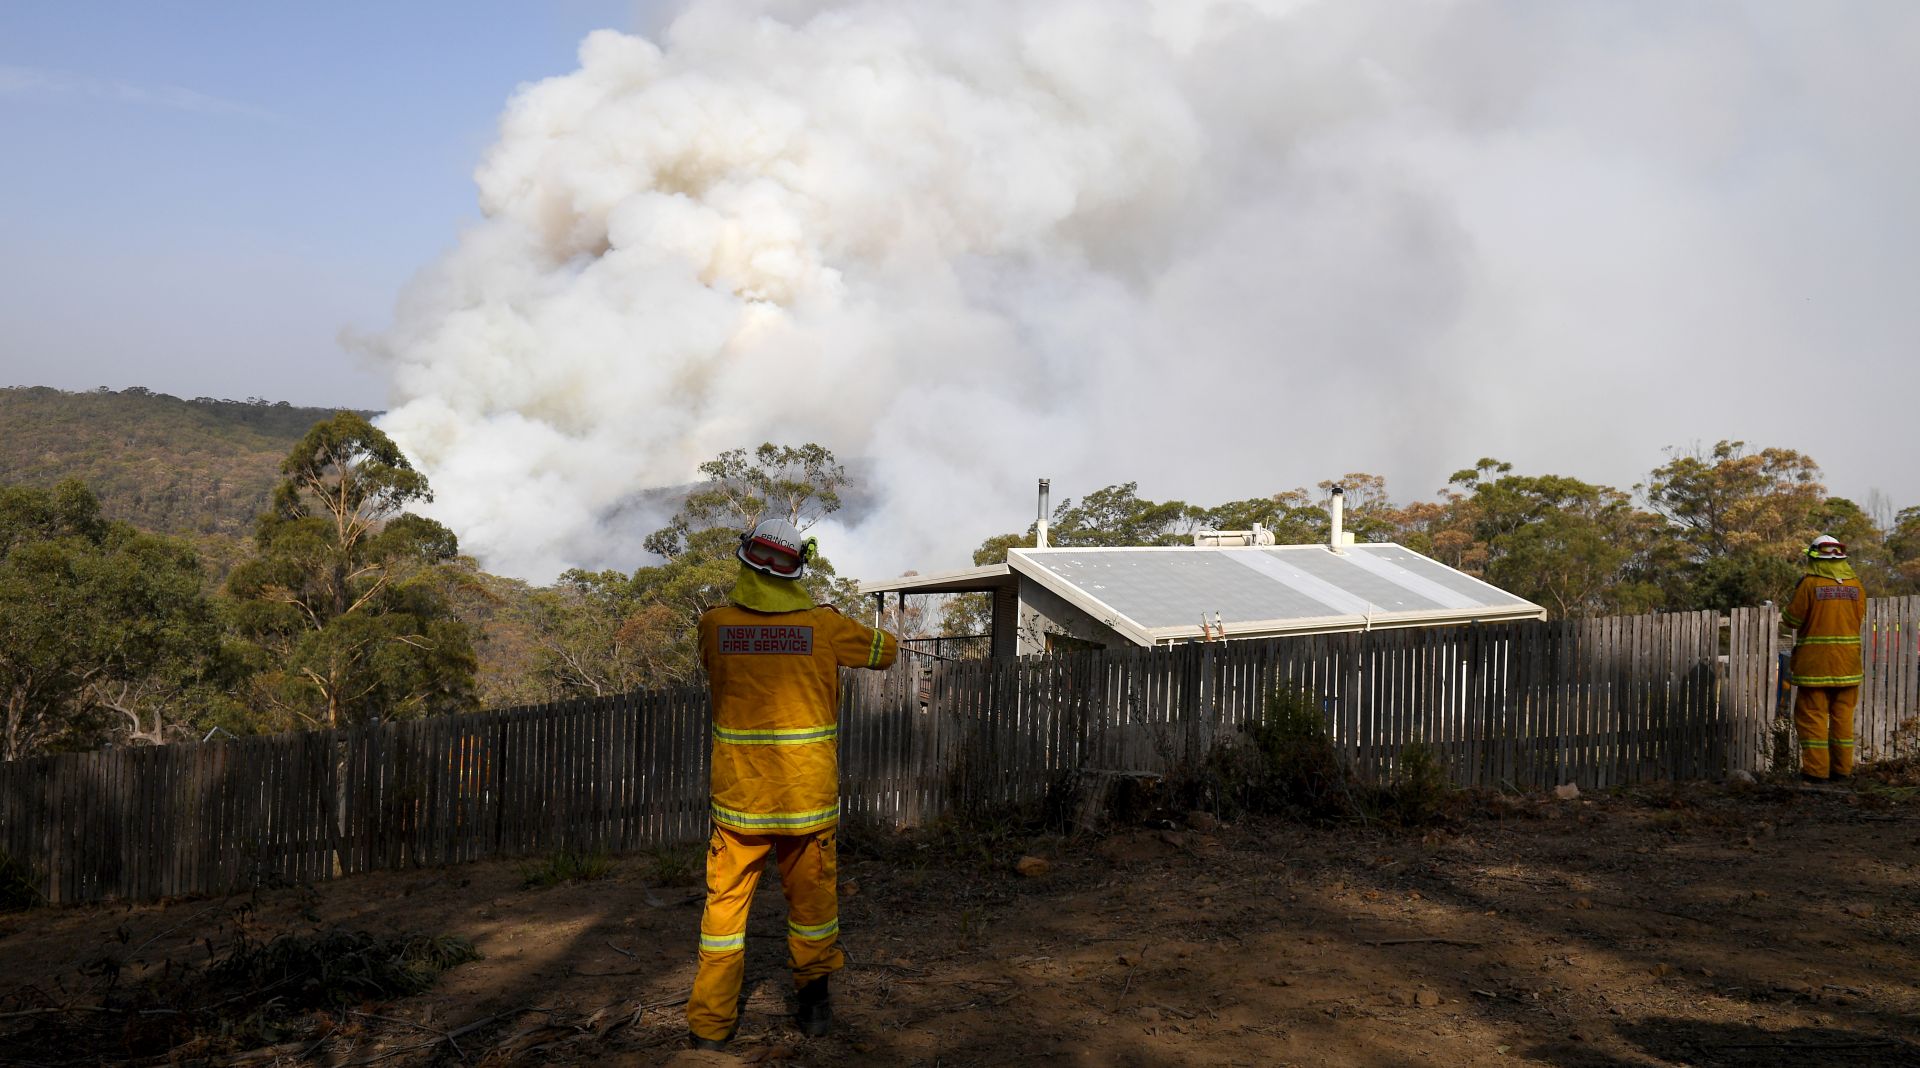 epa08116116 NSW Rural Fire Service crews watch on as a fire burns in bushland close to homes at Penrose in the NSW Southern Highlands, some 165km south of Sydney, New South Wales (NSW), Australia, 10 January 2020. The Rural Fire Service has placed total fire bans on 10 regions across the state.  EPA/DAN HIMBRECHTS  AUSTRALIA AND NEW ZEALAND OUT